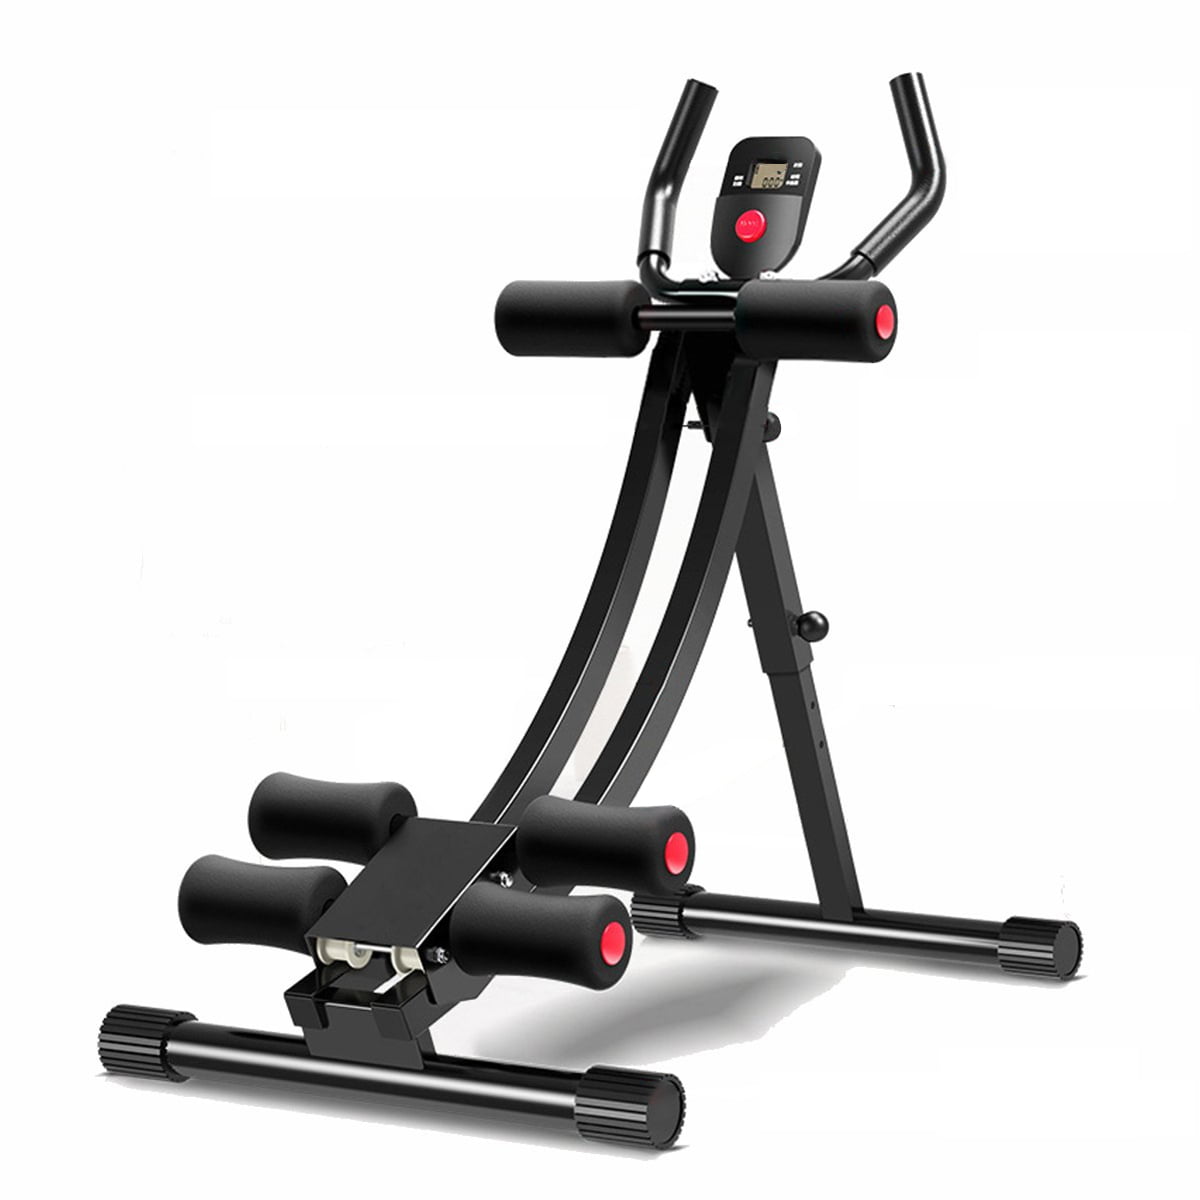 Fitness Ab Machine With Lcd Display Ab Workout Equipment For Home Gym